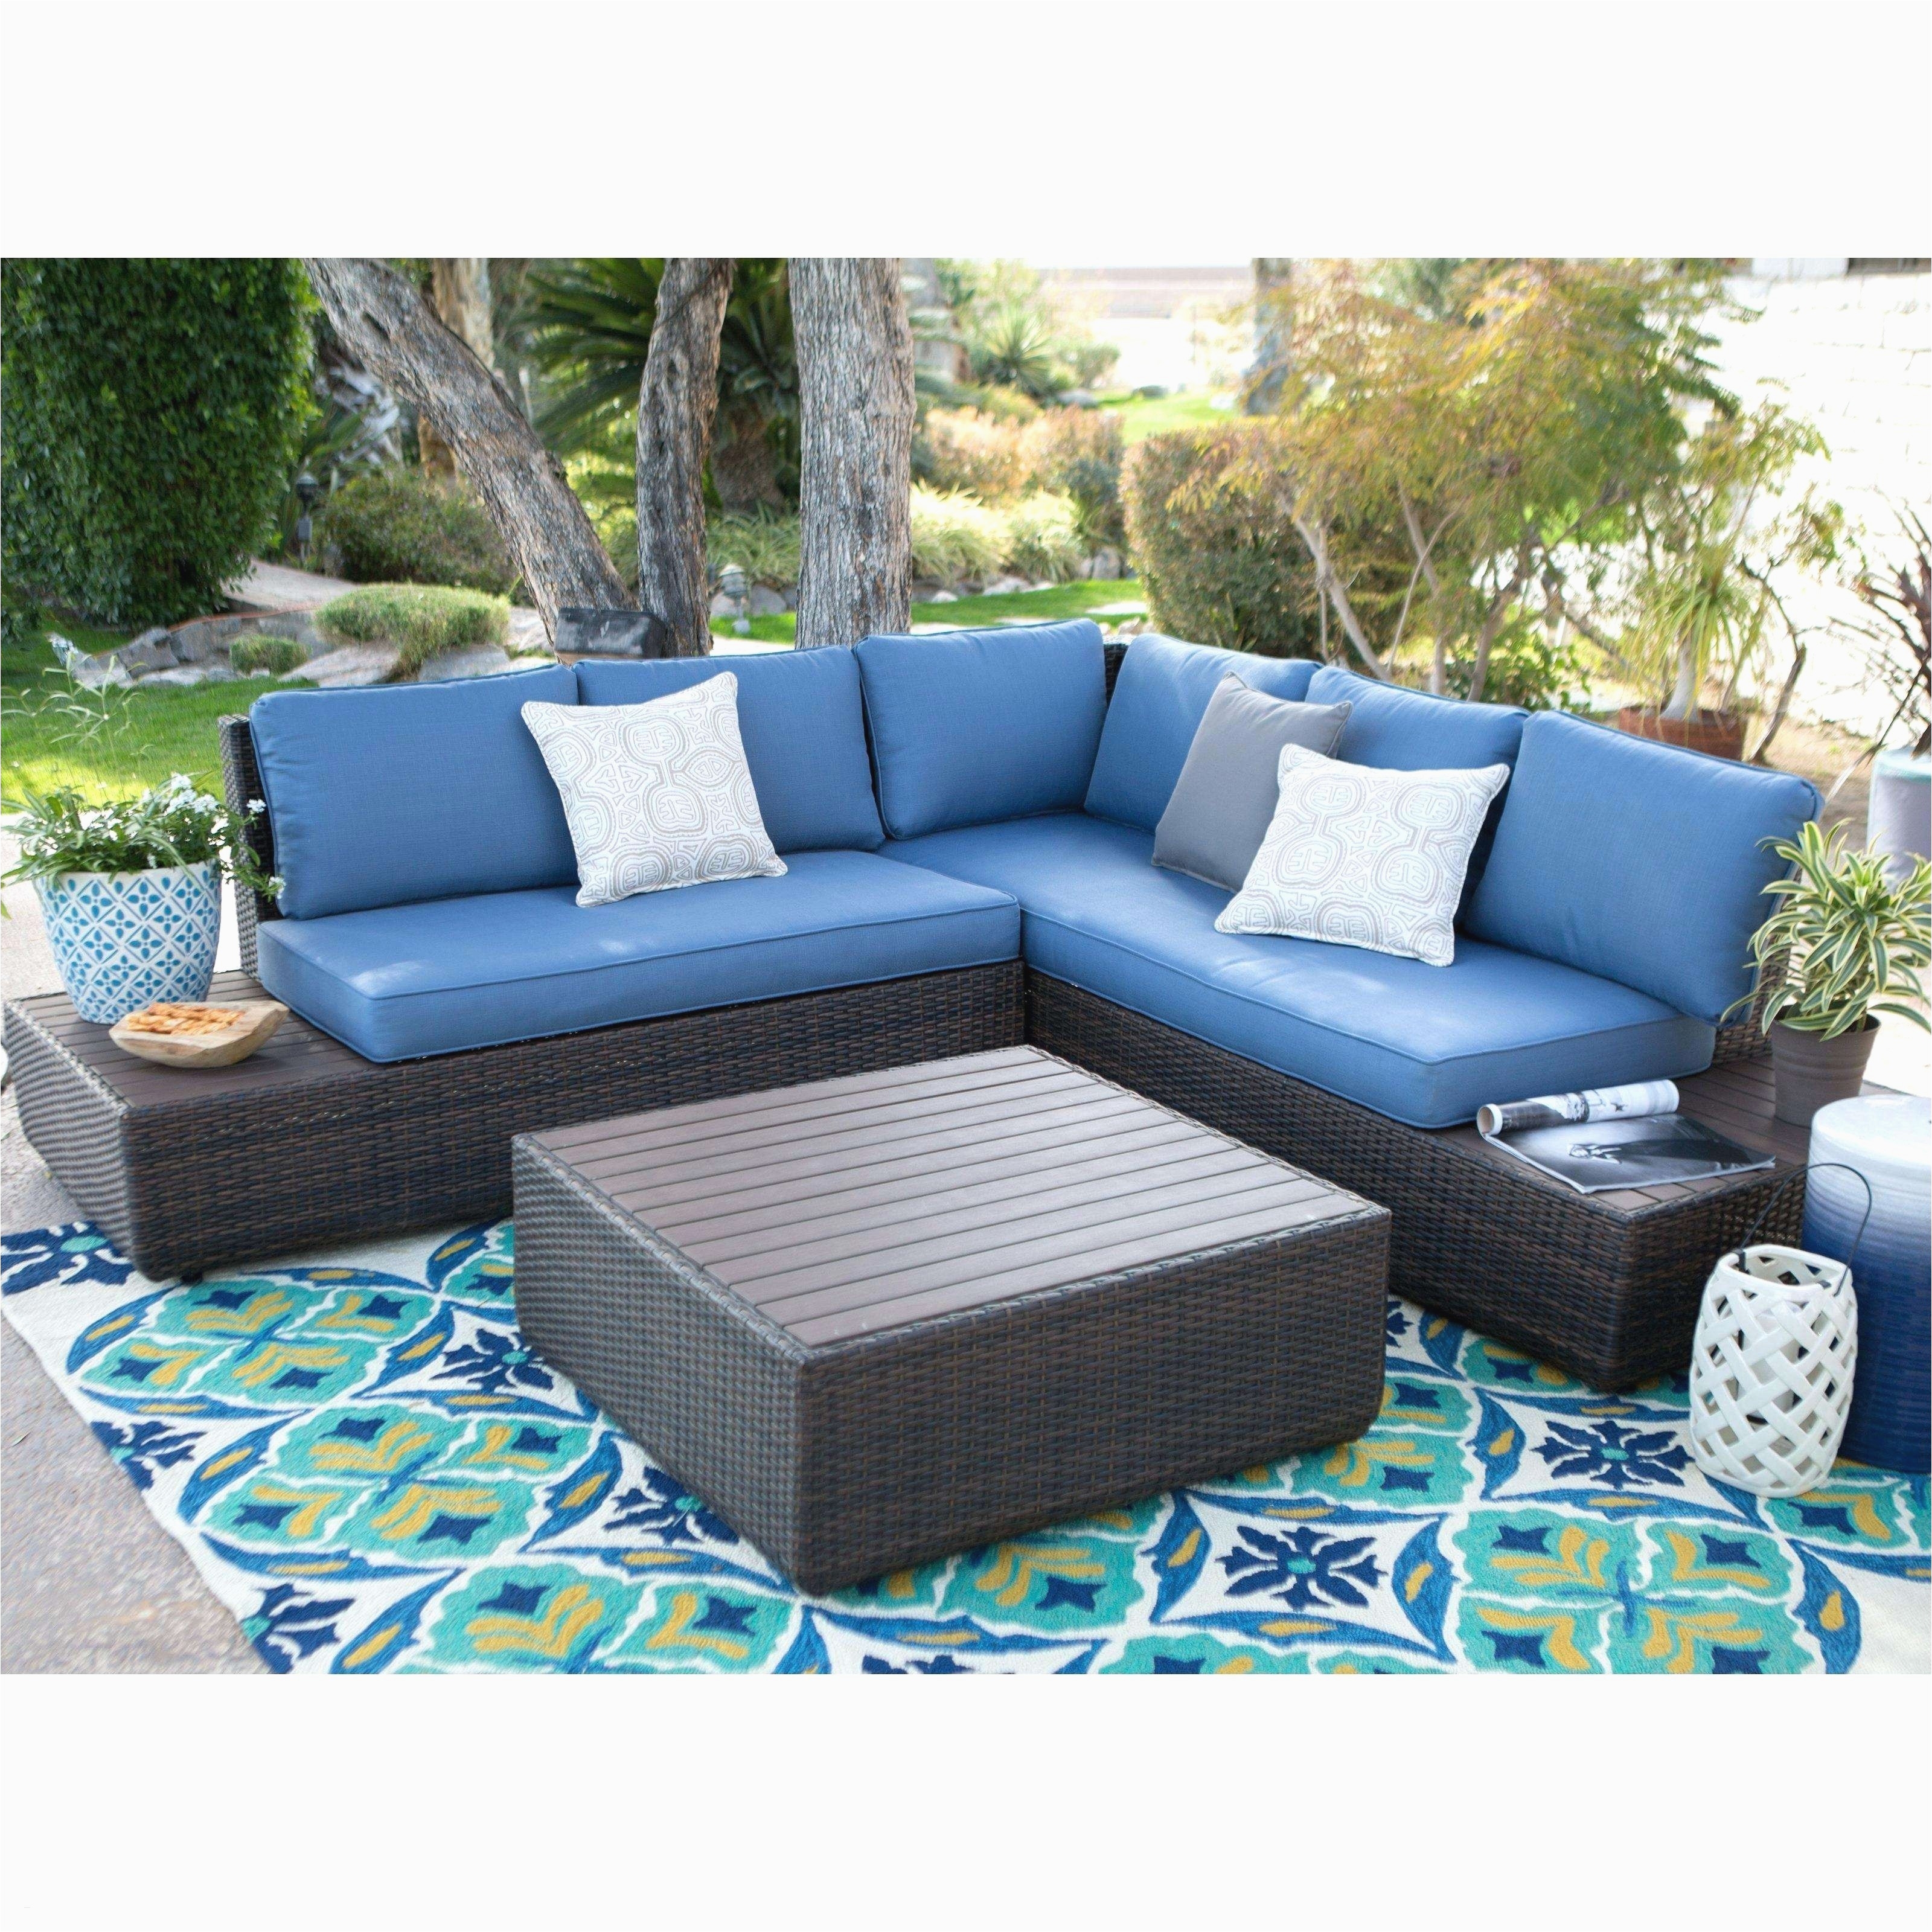 jcpenney outdoor furniture beautiful stackable outdoor chairs design patios lovely wicker outdoor sofa 0d